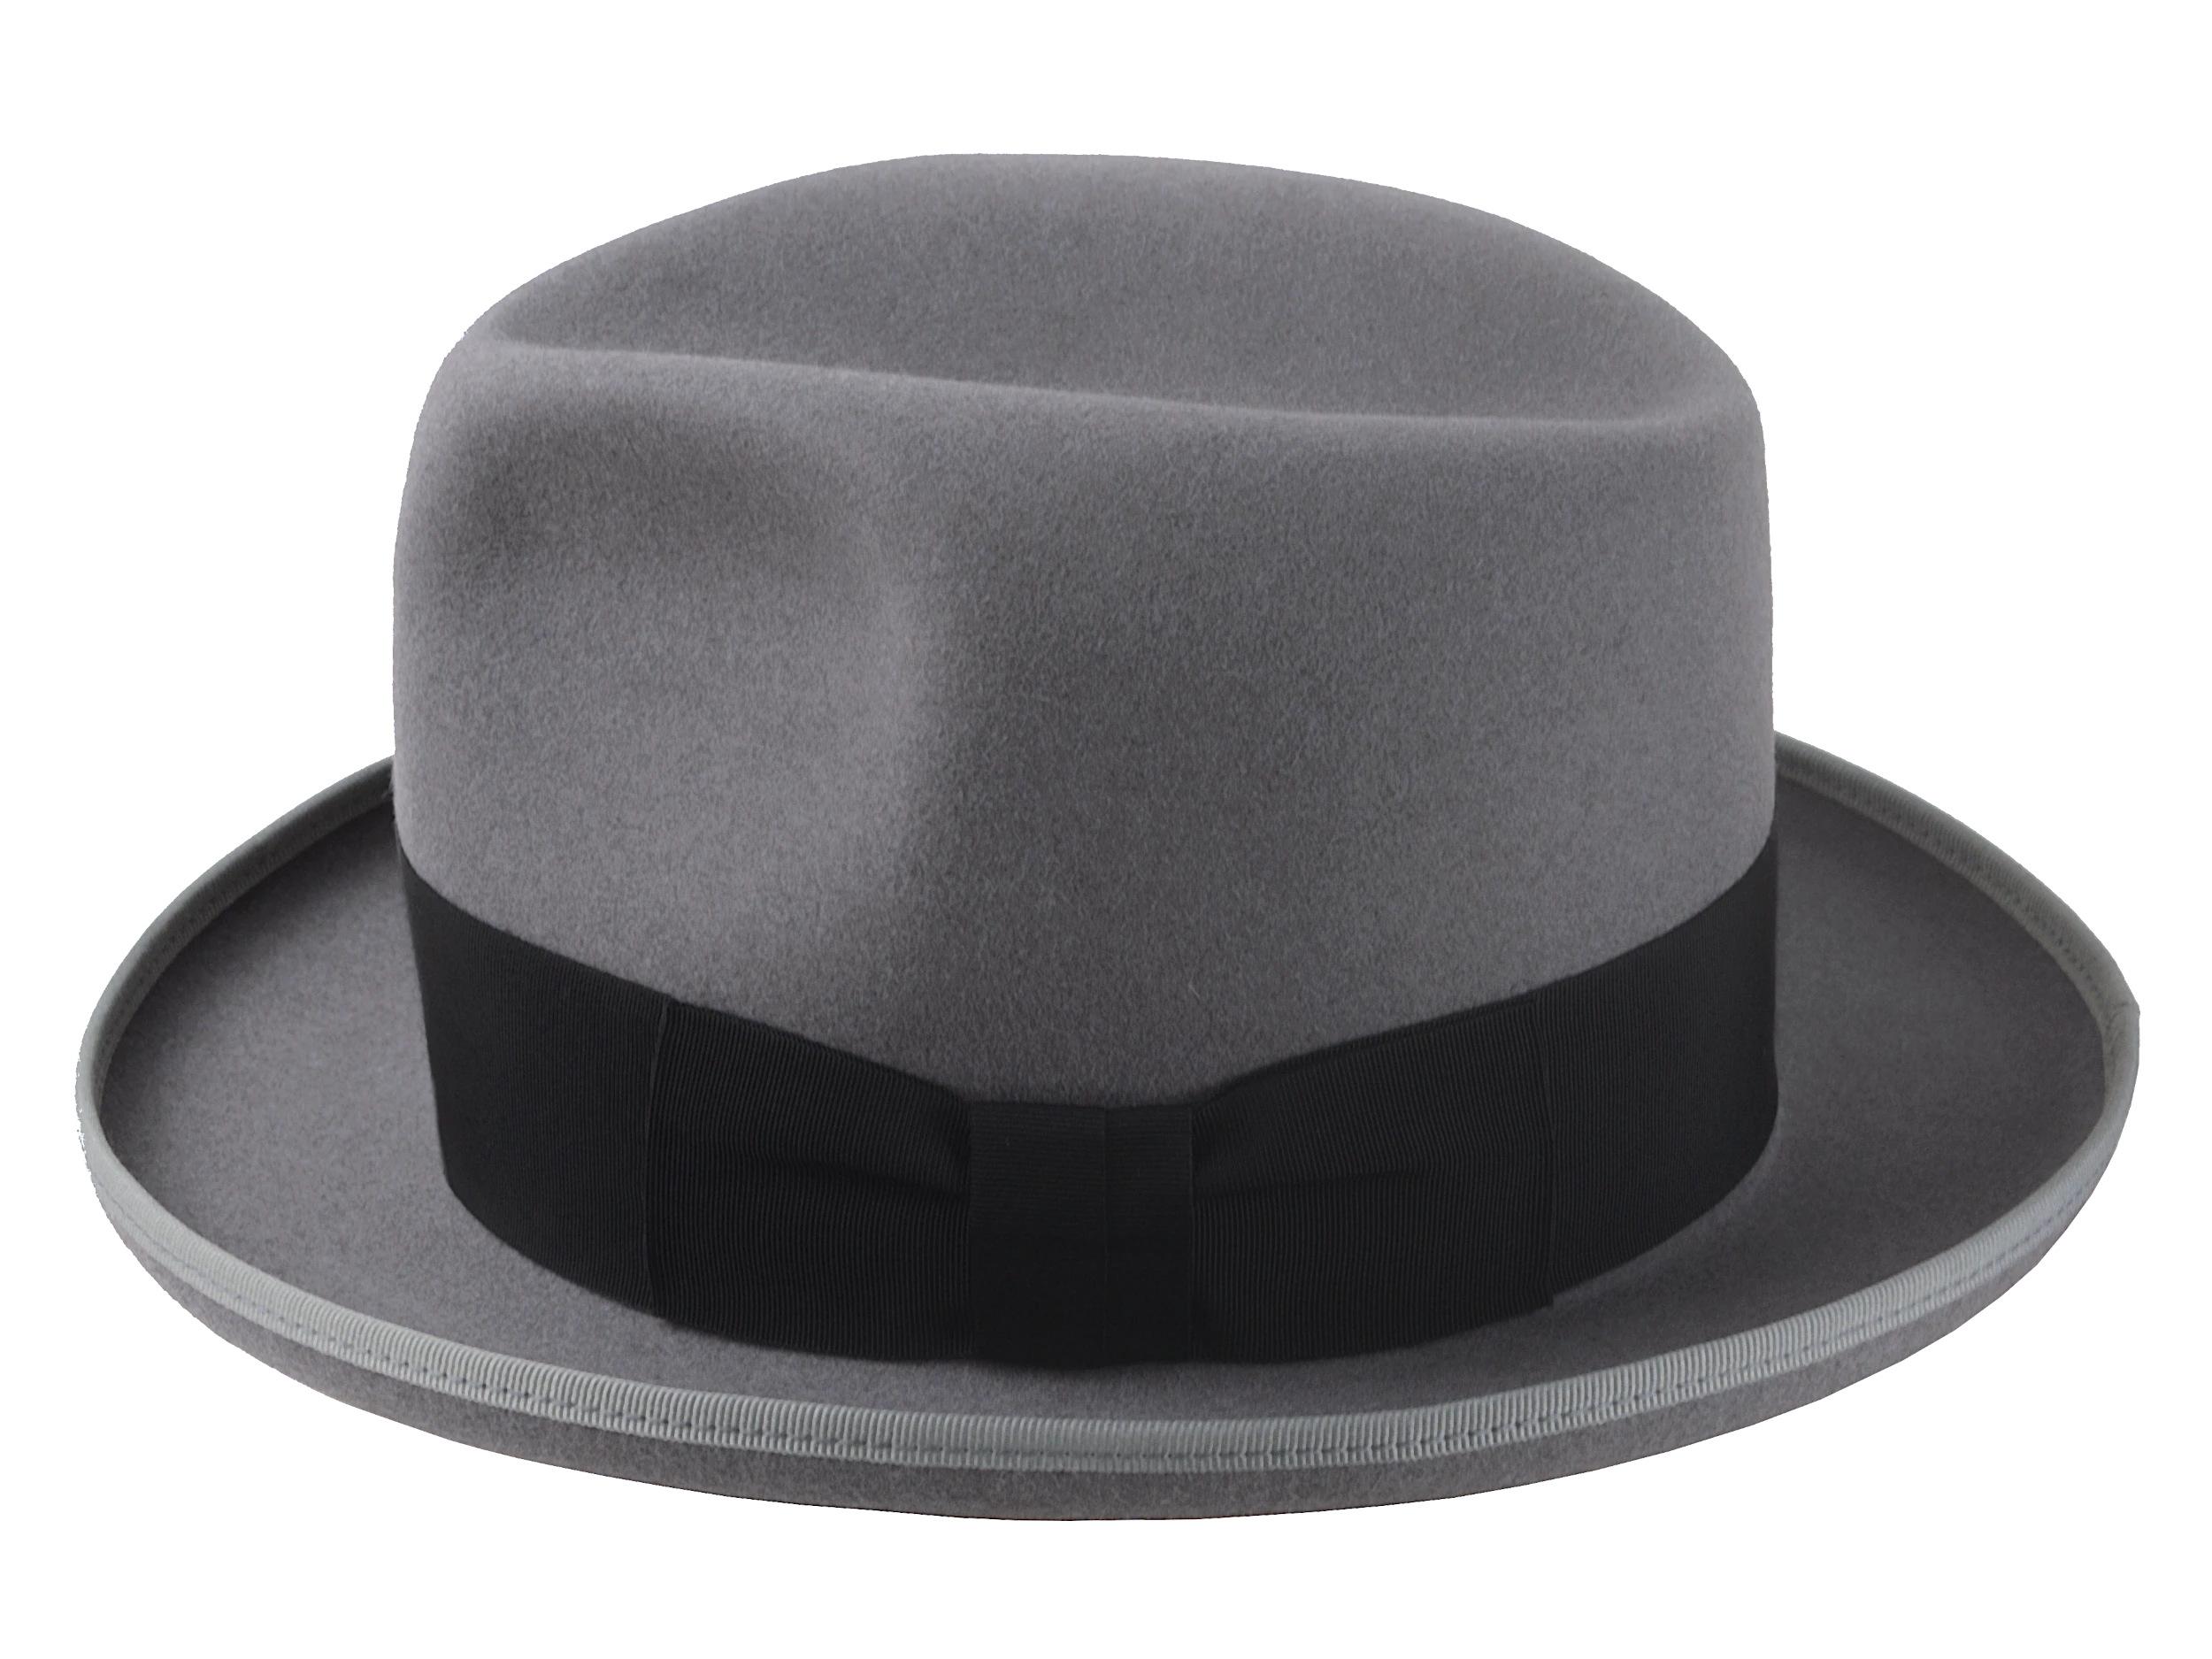 The Grandmaster: Side angle showing the ribbon-bound rolled brim and hatband | Agnoulita Hats